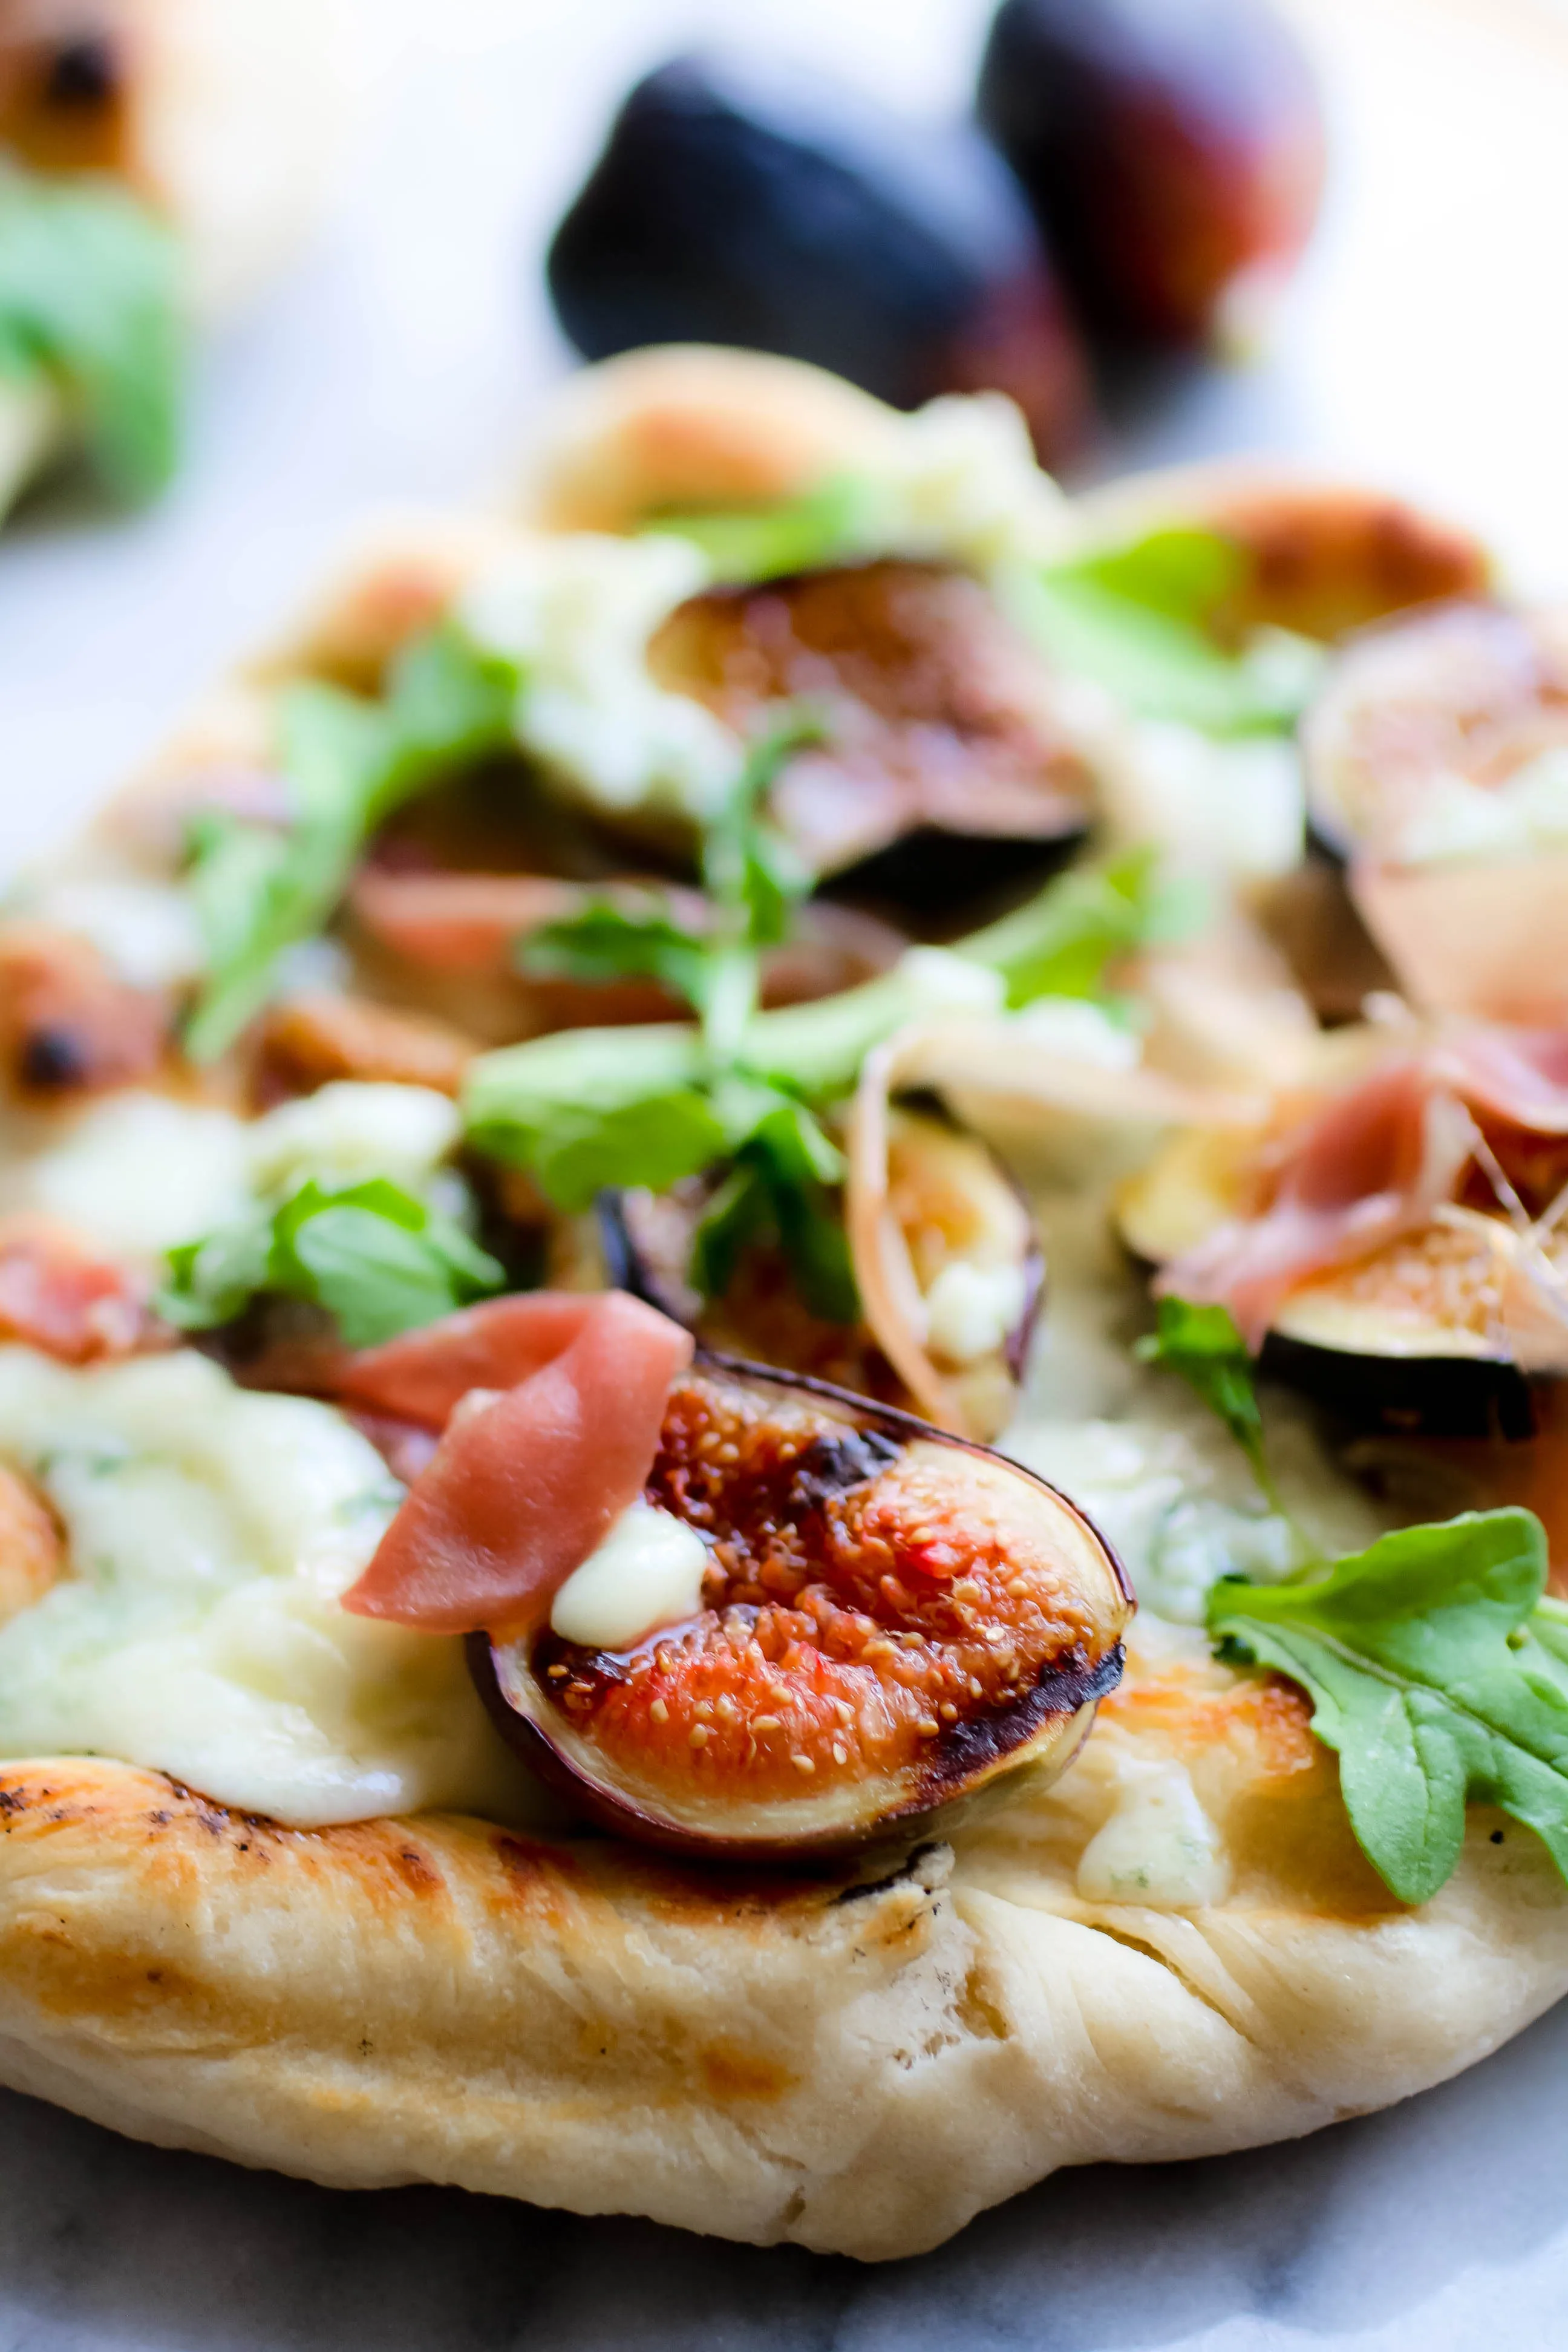 Grilled Pizza with Fig, Prosciutto, and Blue Cheese is a great grilled pizza. You'll enjoy Grilled Pizza with Fig, Prosciutto, and Blue Cheese this season.